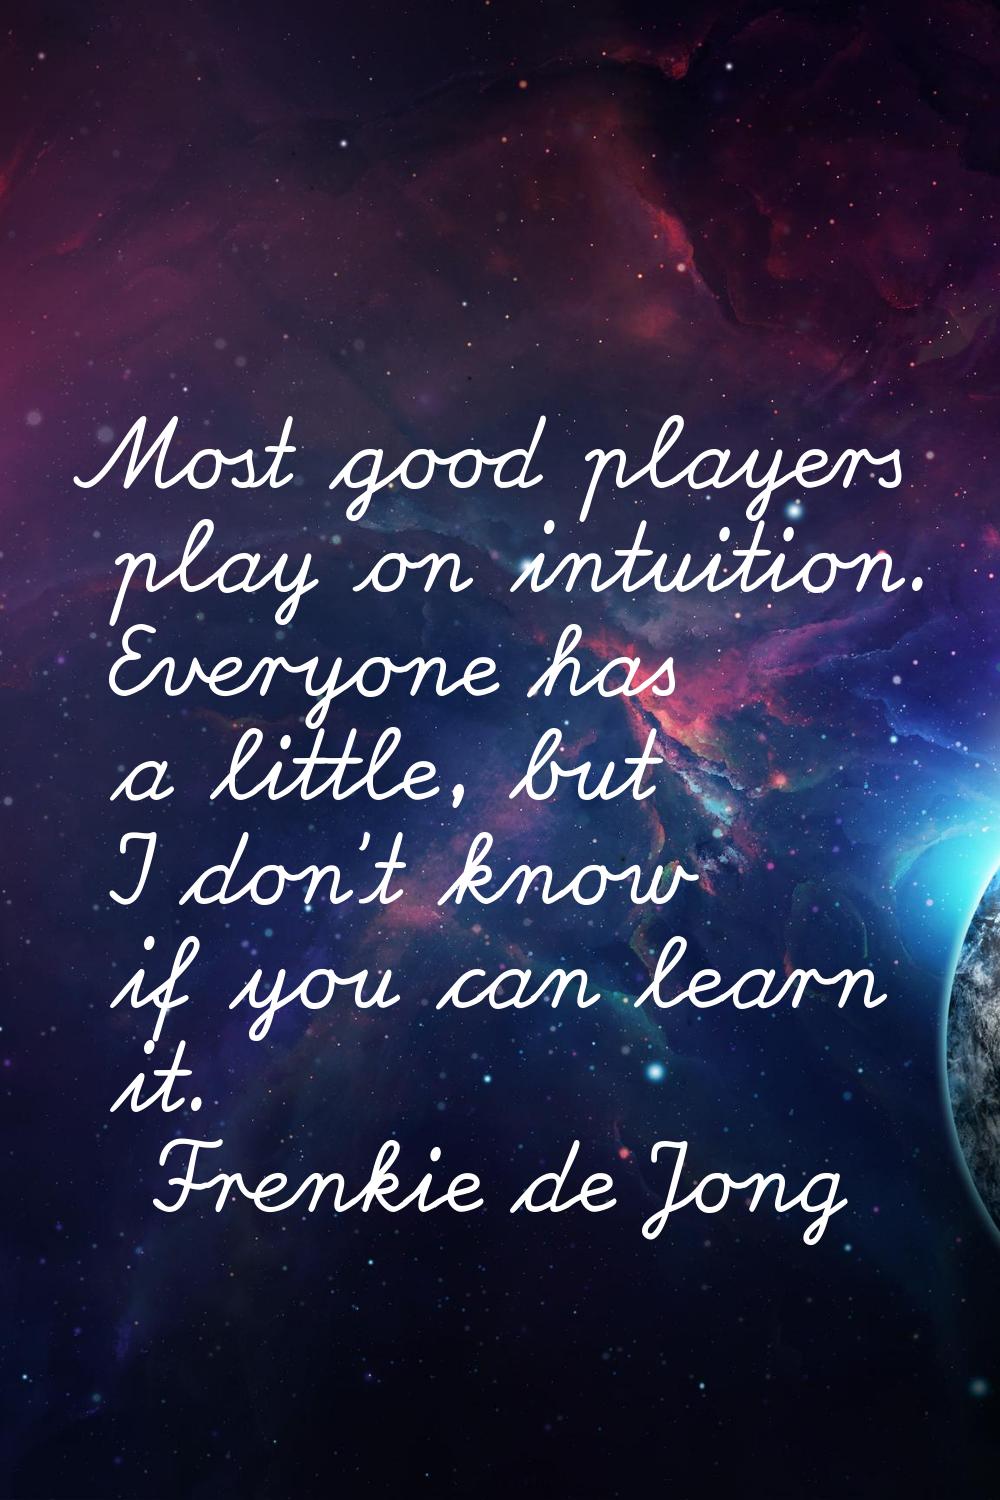 Most good players play on intuition. Everyone has a little, but I don't know if you can learn it.